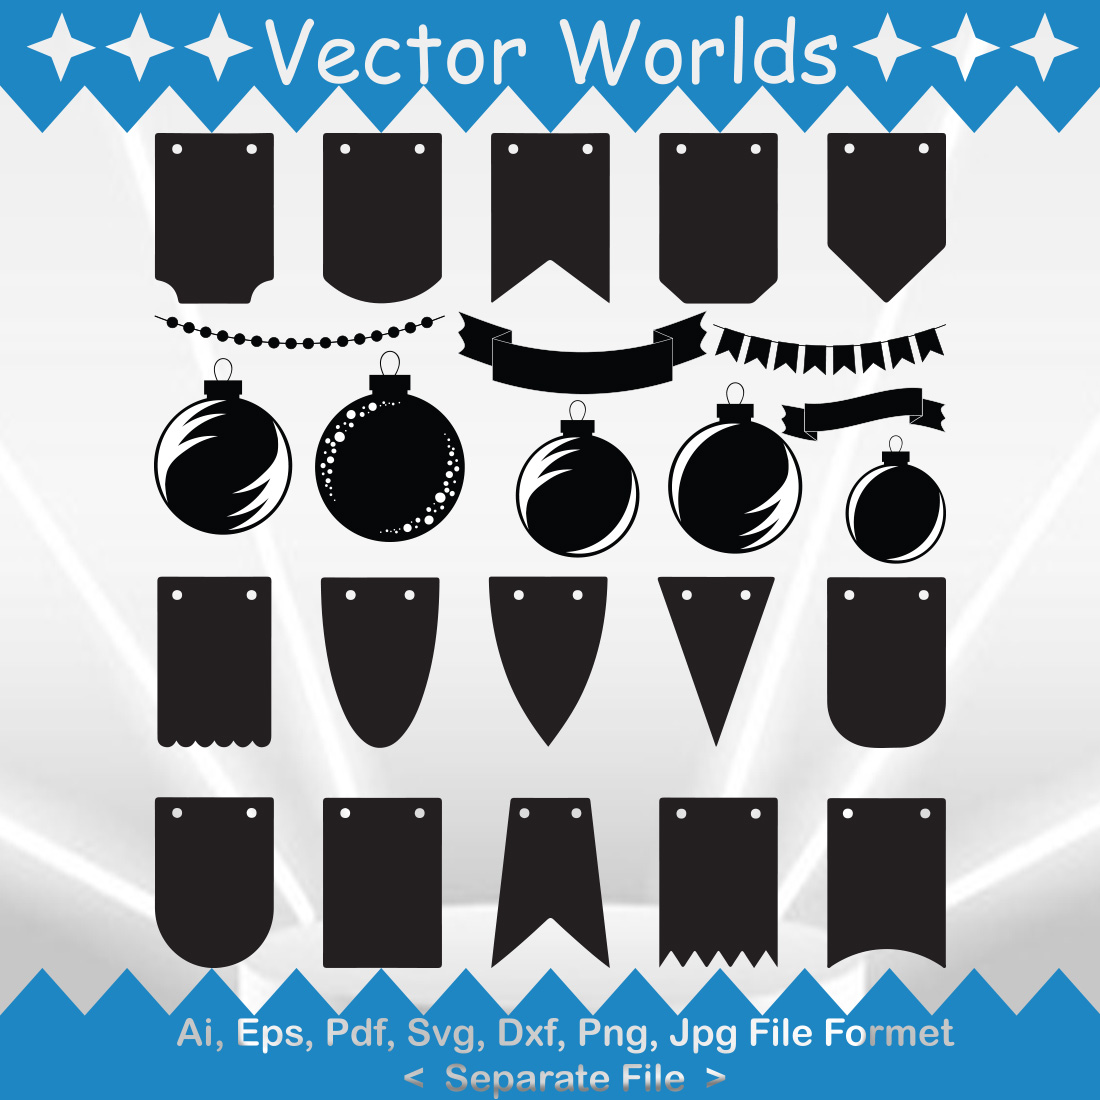 Bundle of irresistible bunting banner silhouette images.